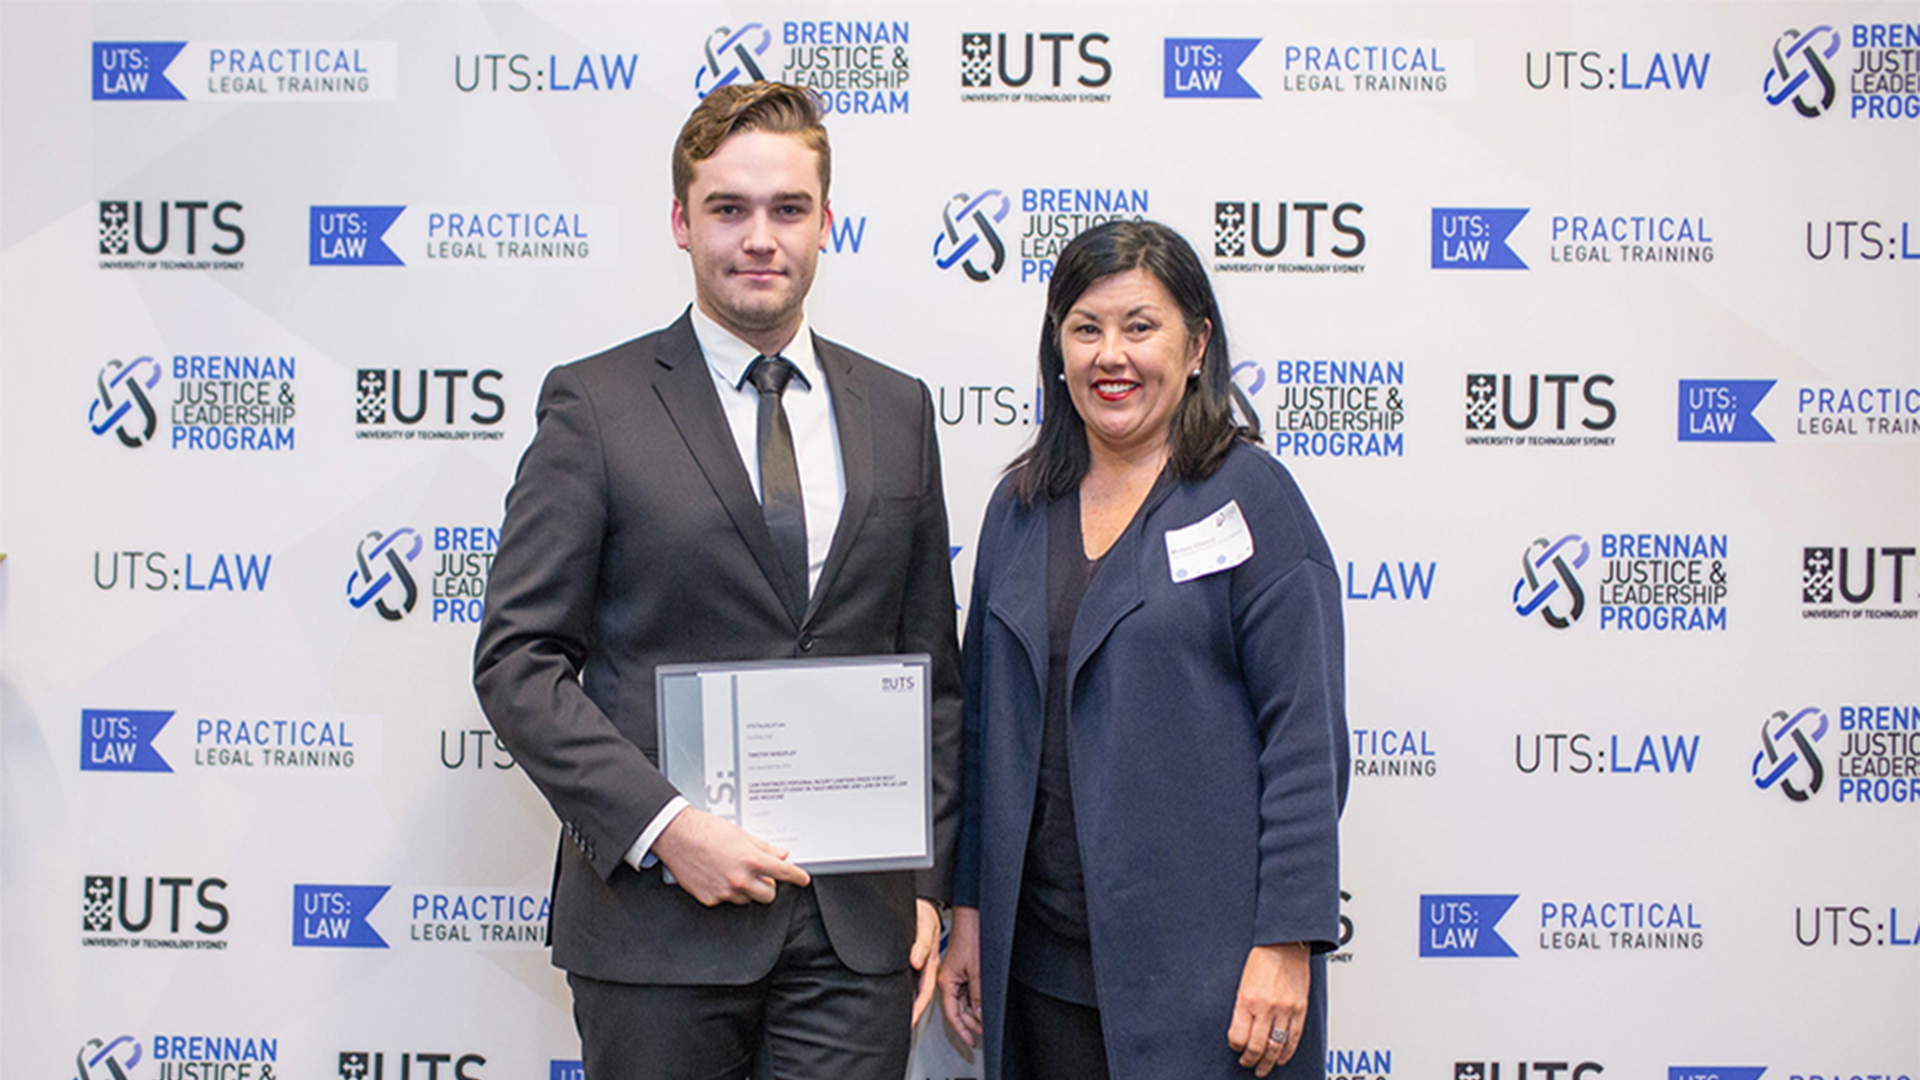 Law Partners UTS Award winner determined to make a difference.